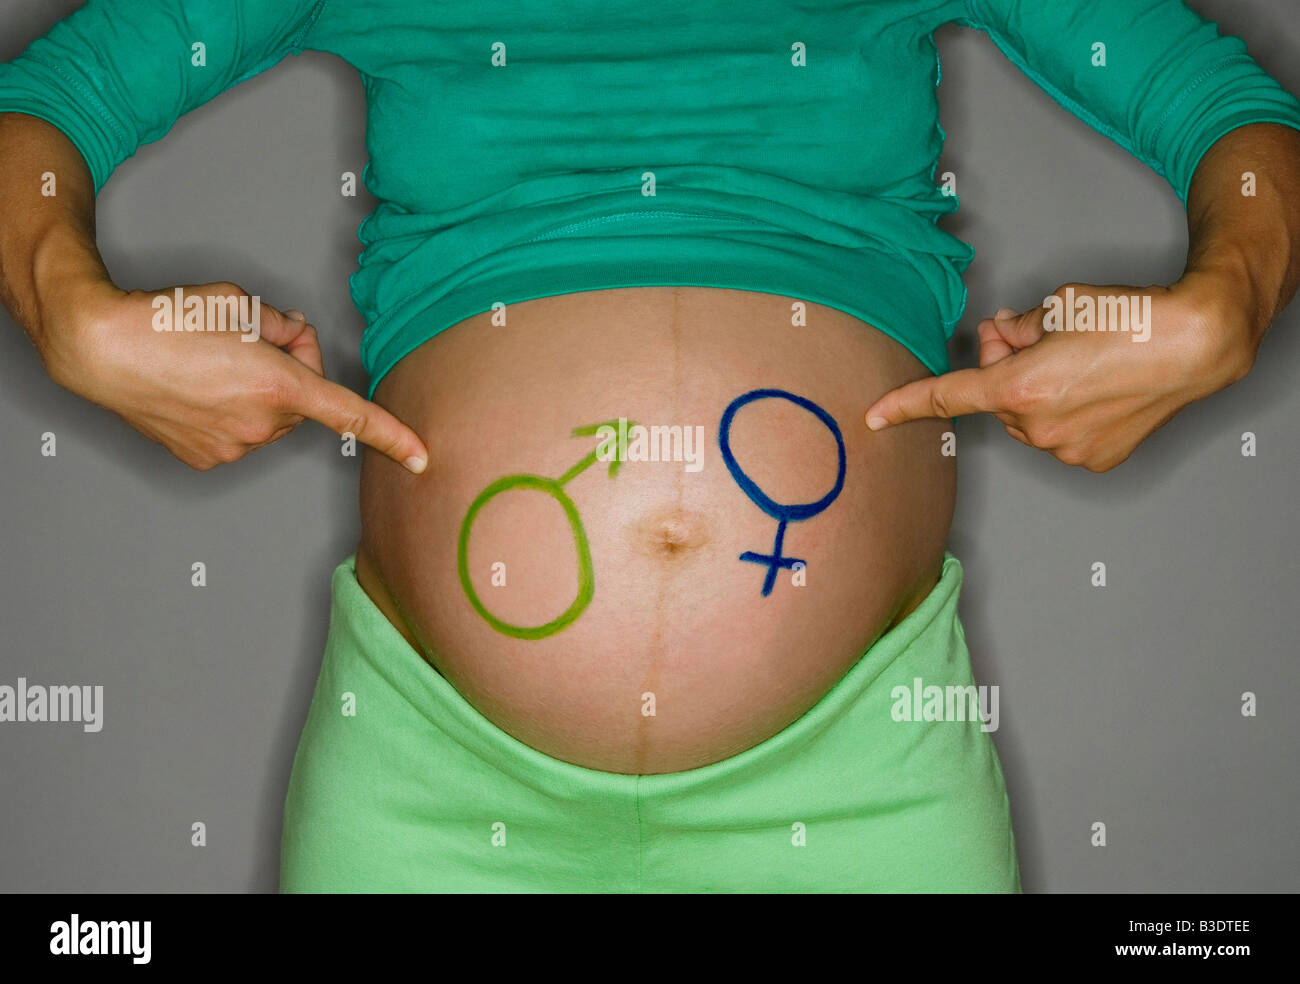 PREGNANT WOMAN PAINTED ON BELLY Stock Photo